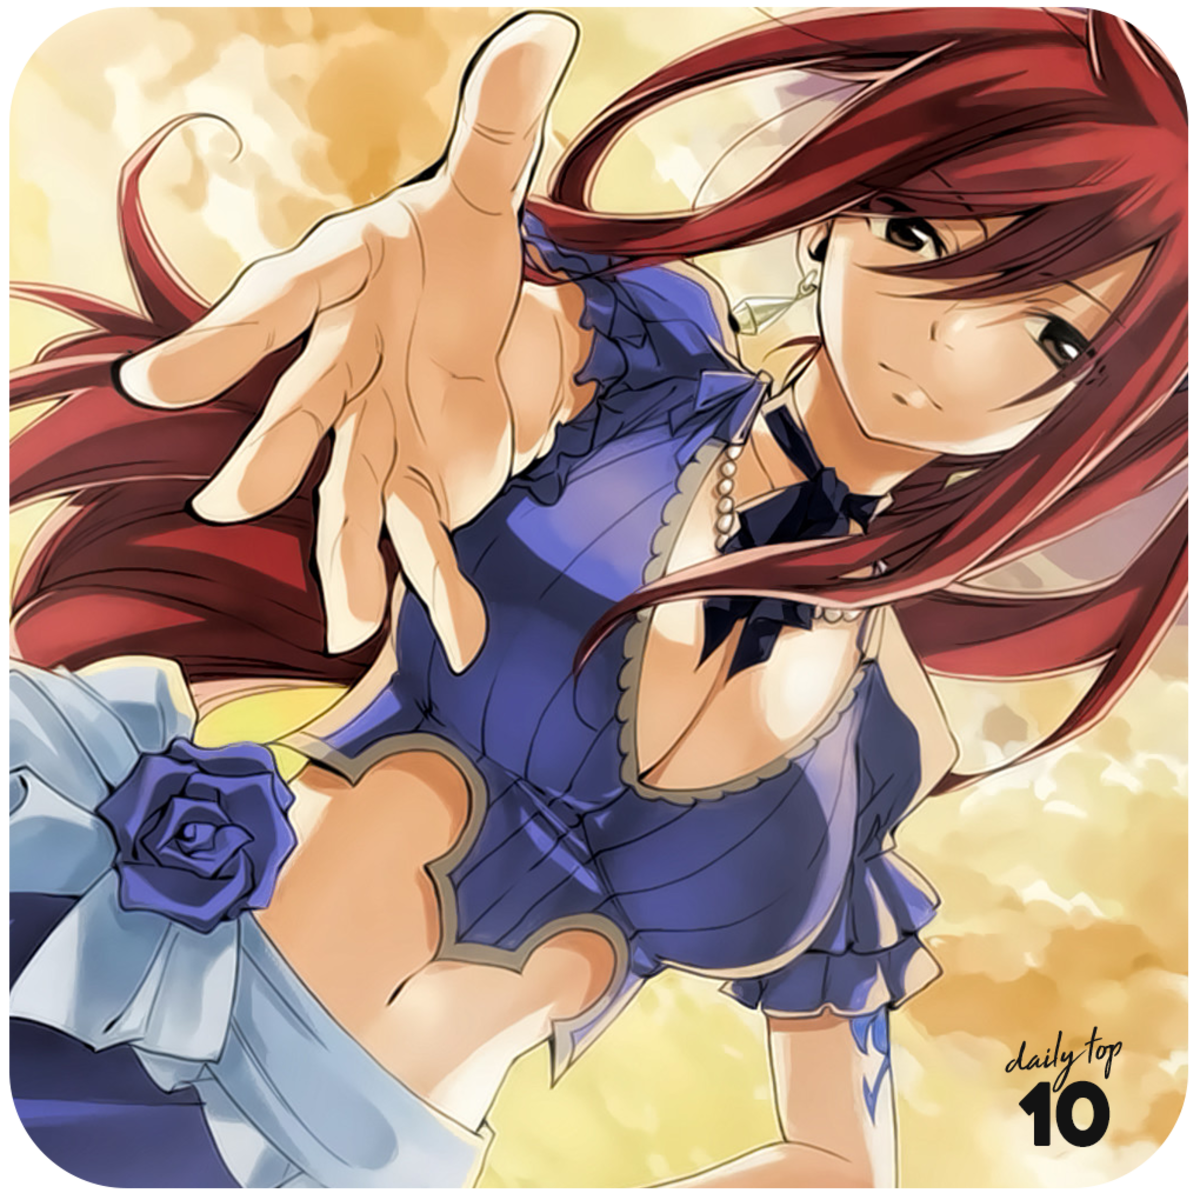 Erza Scarlet reaching her hand out.